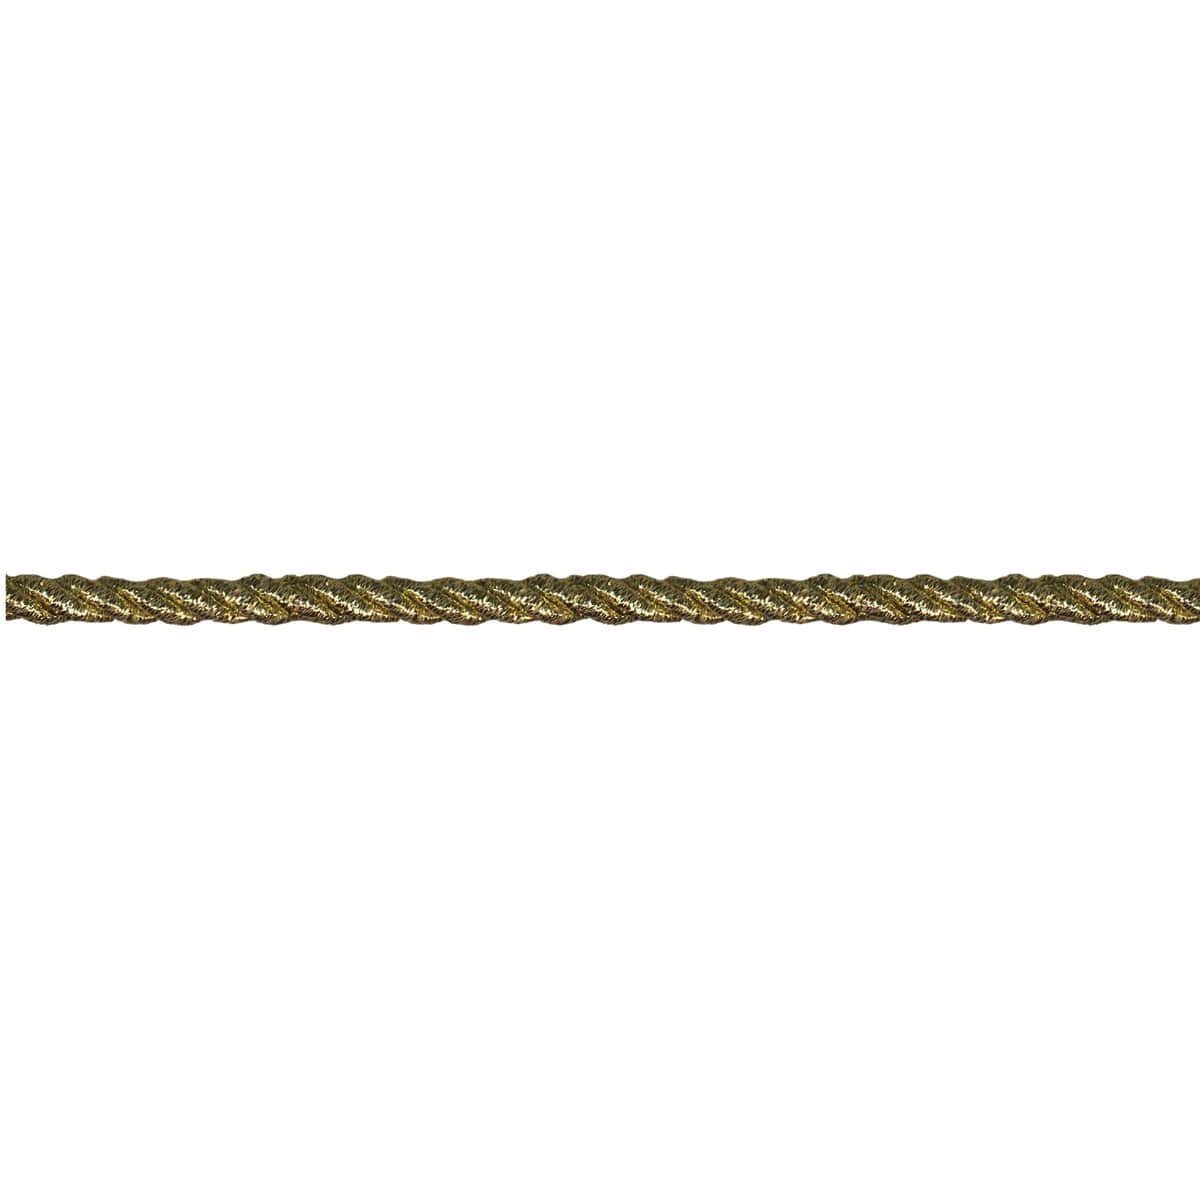 36 Total Yards 5mm Twisted Gold Cord for Crafts, Gold Rope Ribbon